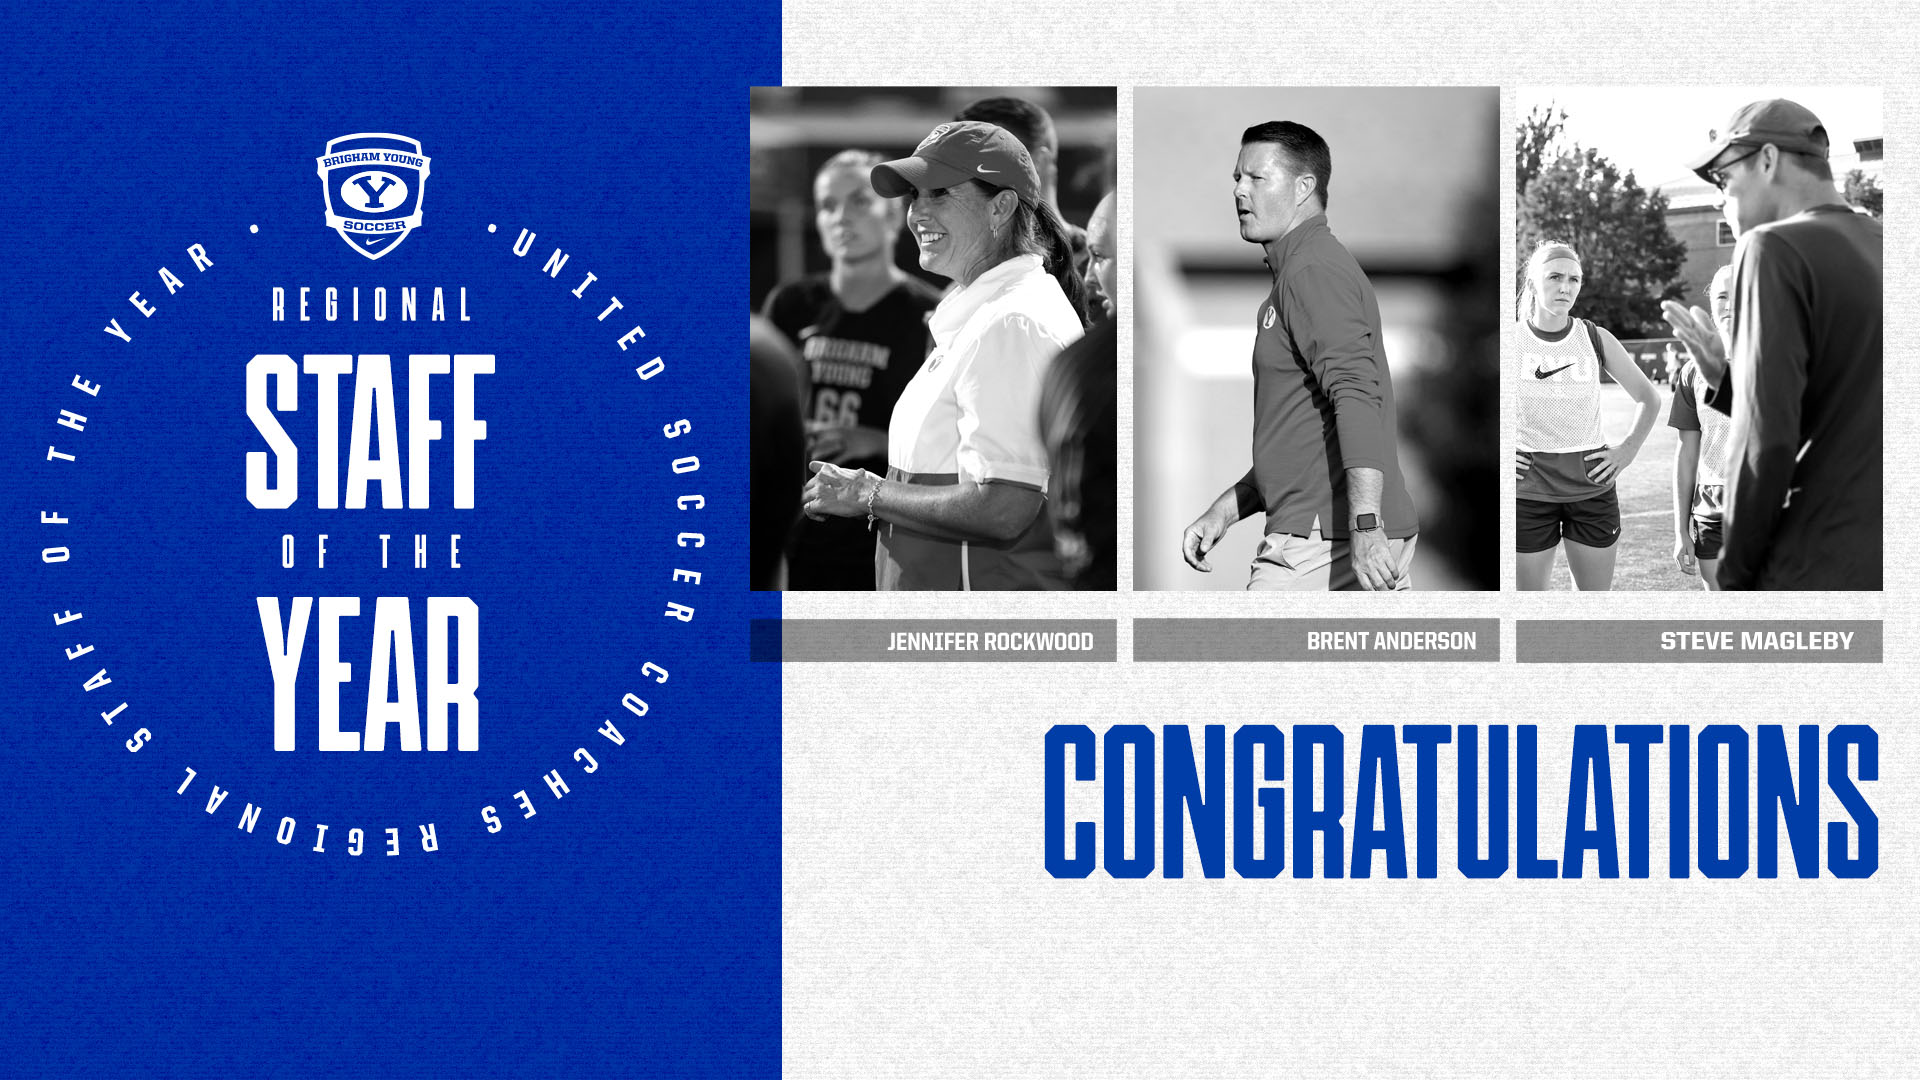 BYU coaches are Regional Staff of the Year